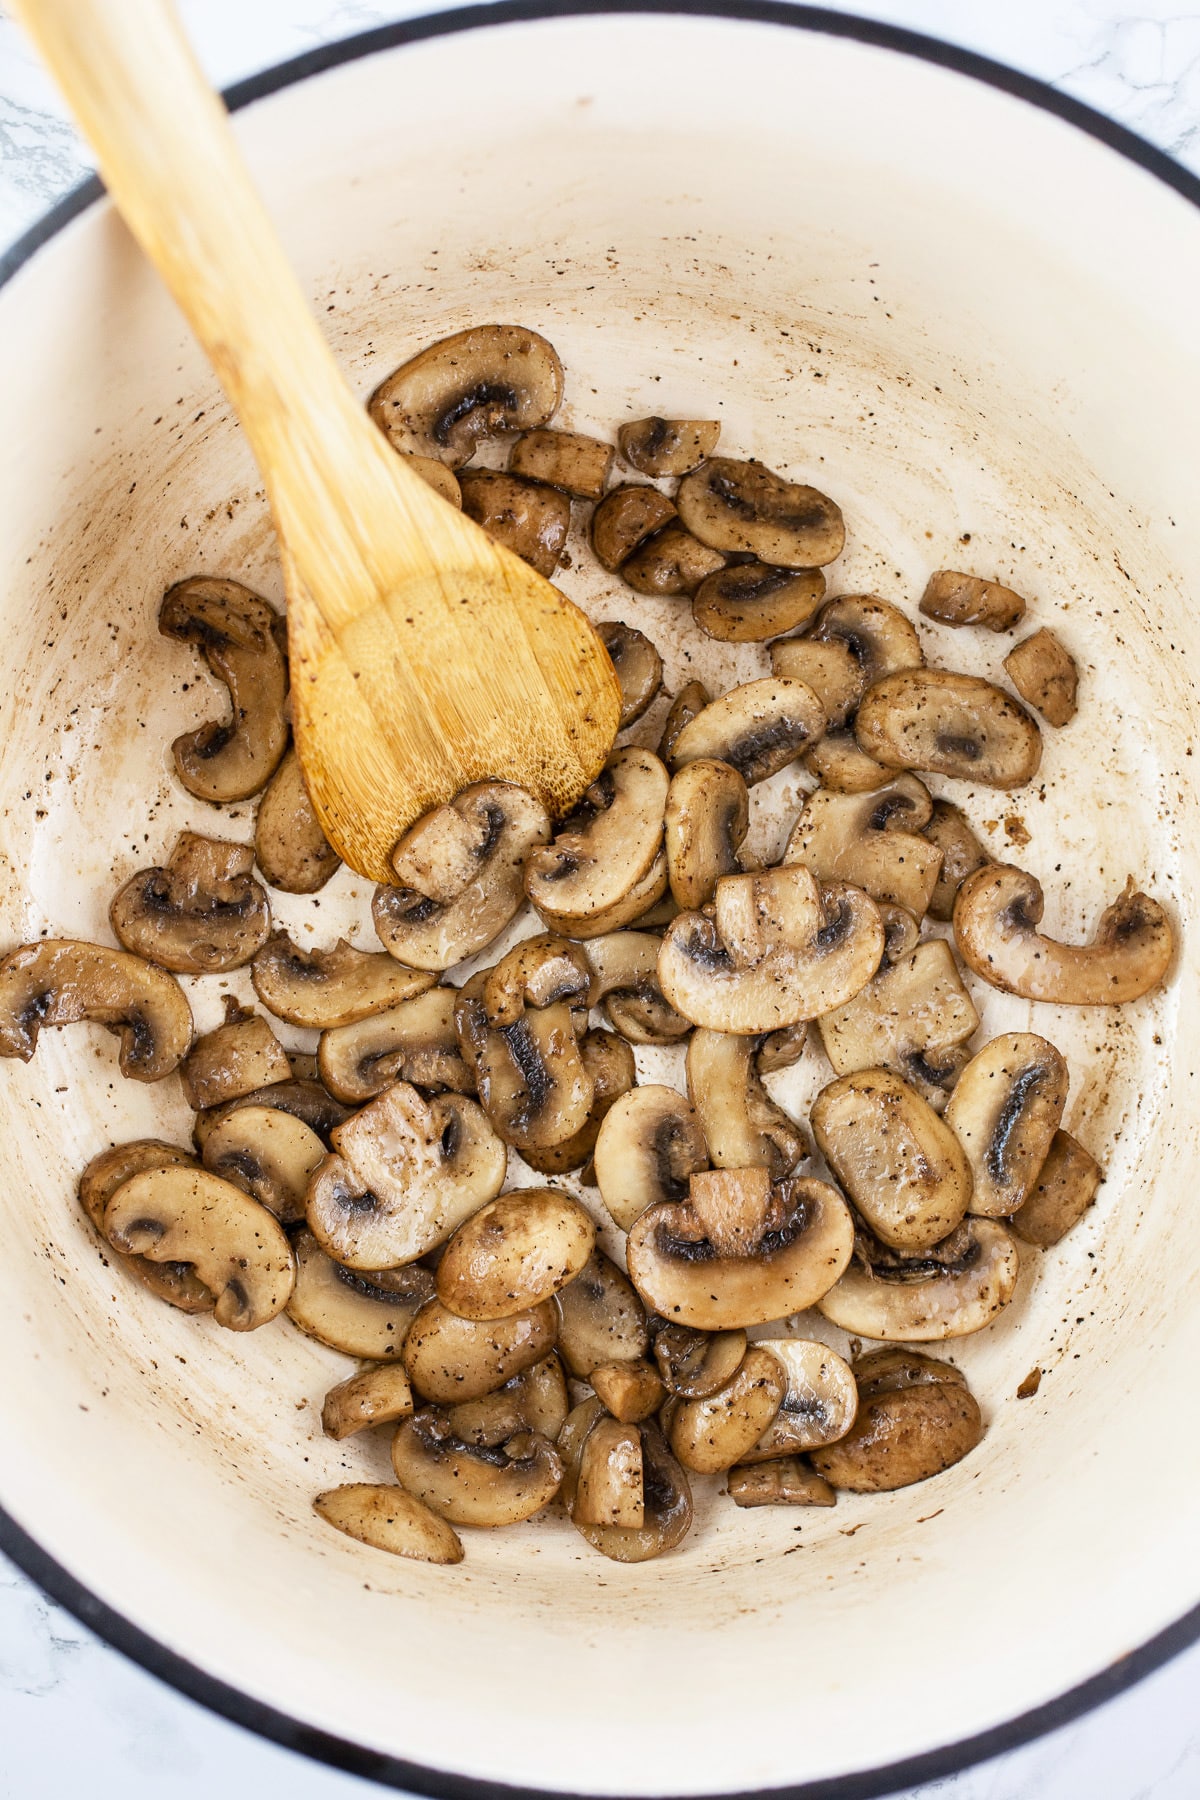 Sliced mushrooms sautéed in Dutch oven with wooden spoon.